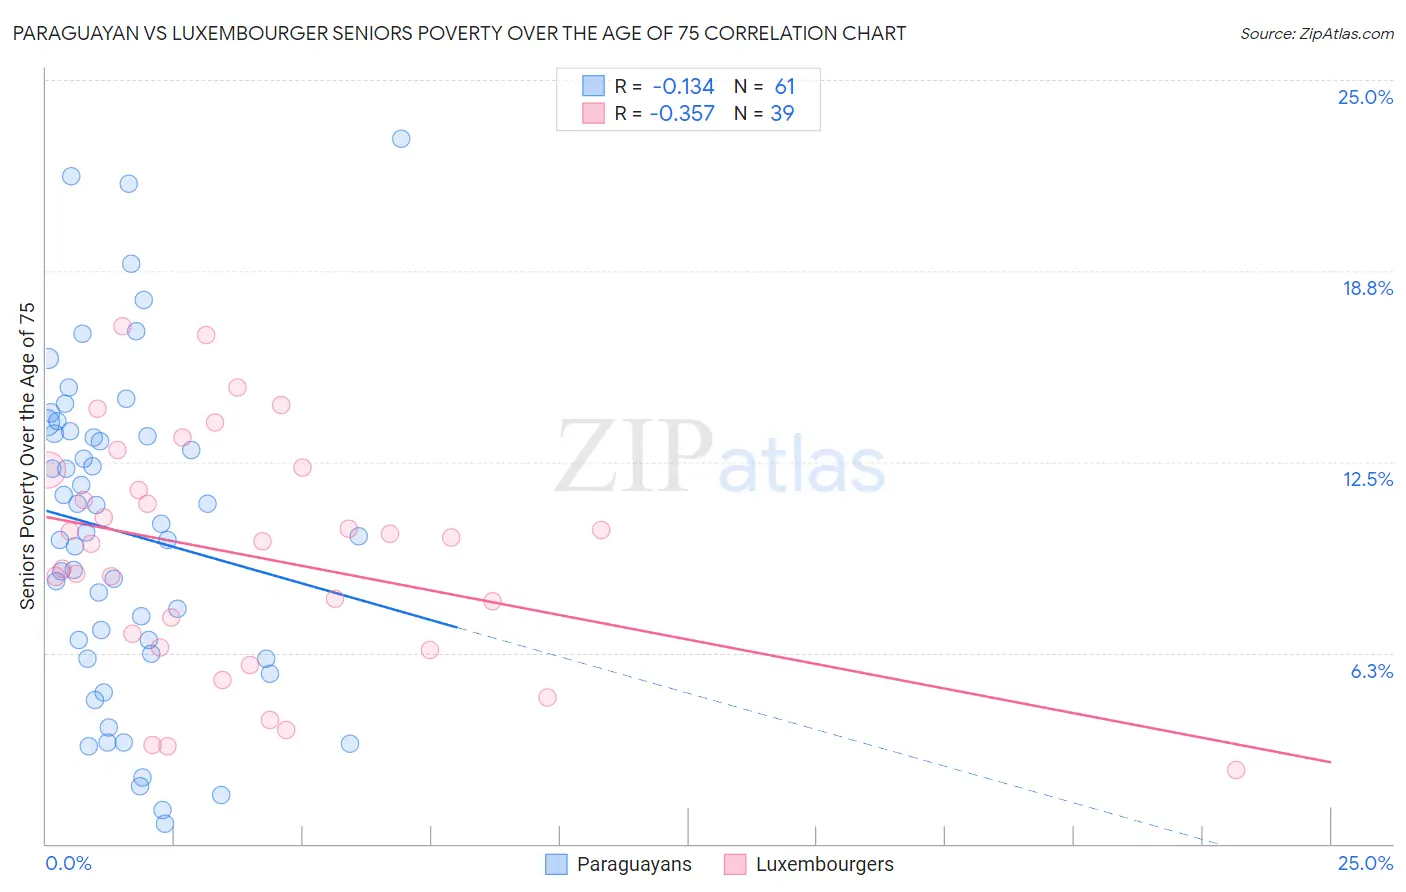 Paraguayan vs Luxembourger Seniors Poverty Over the Age of 75